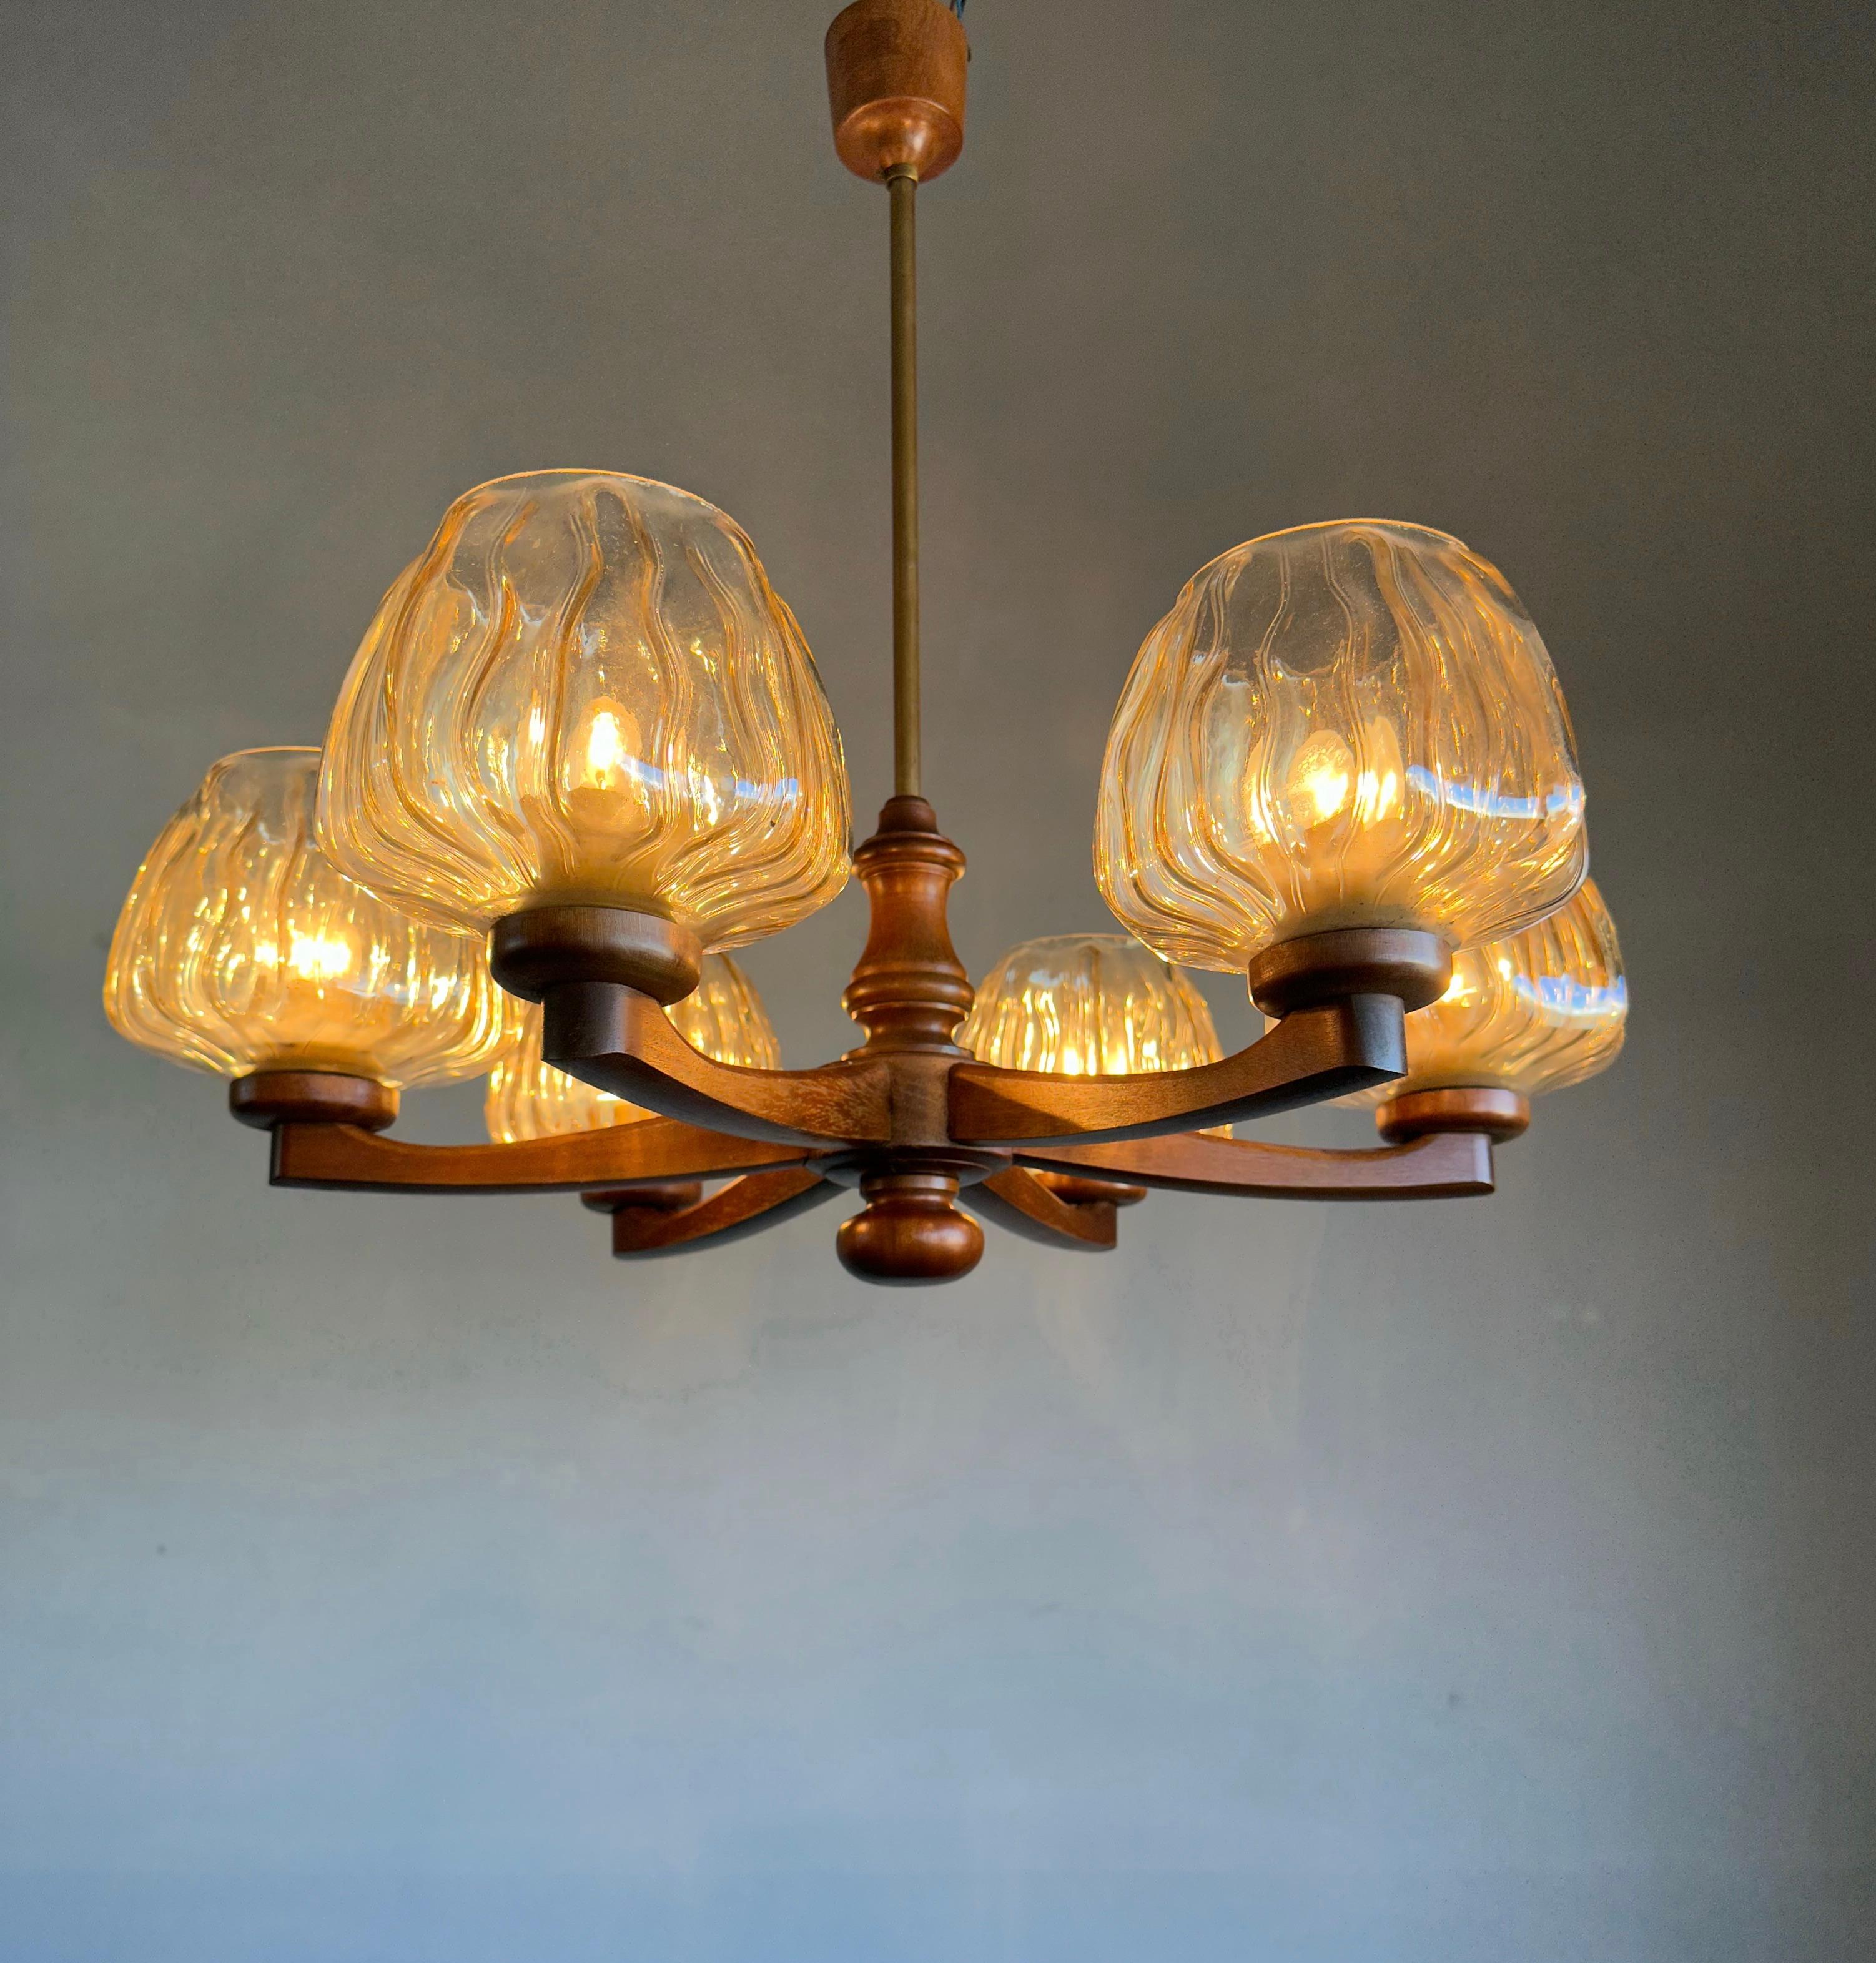 Sophisticated Mid-Century Modern 6 Light Chandelier with Art Glass Shades 1960s For Sale 7